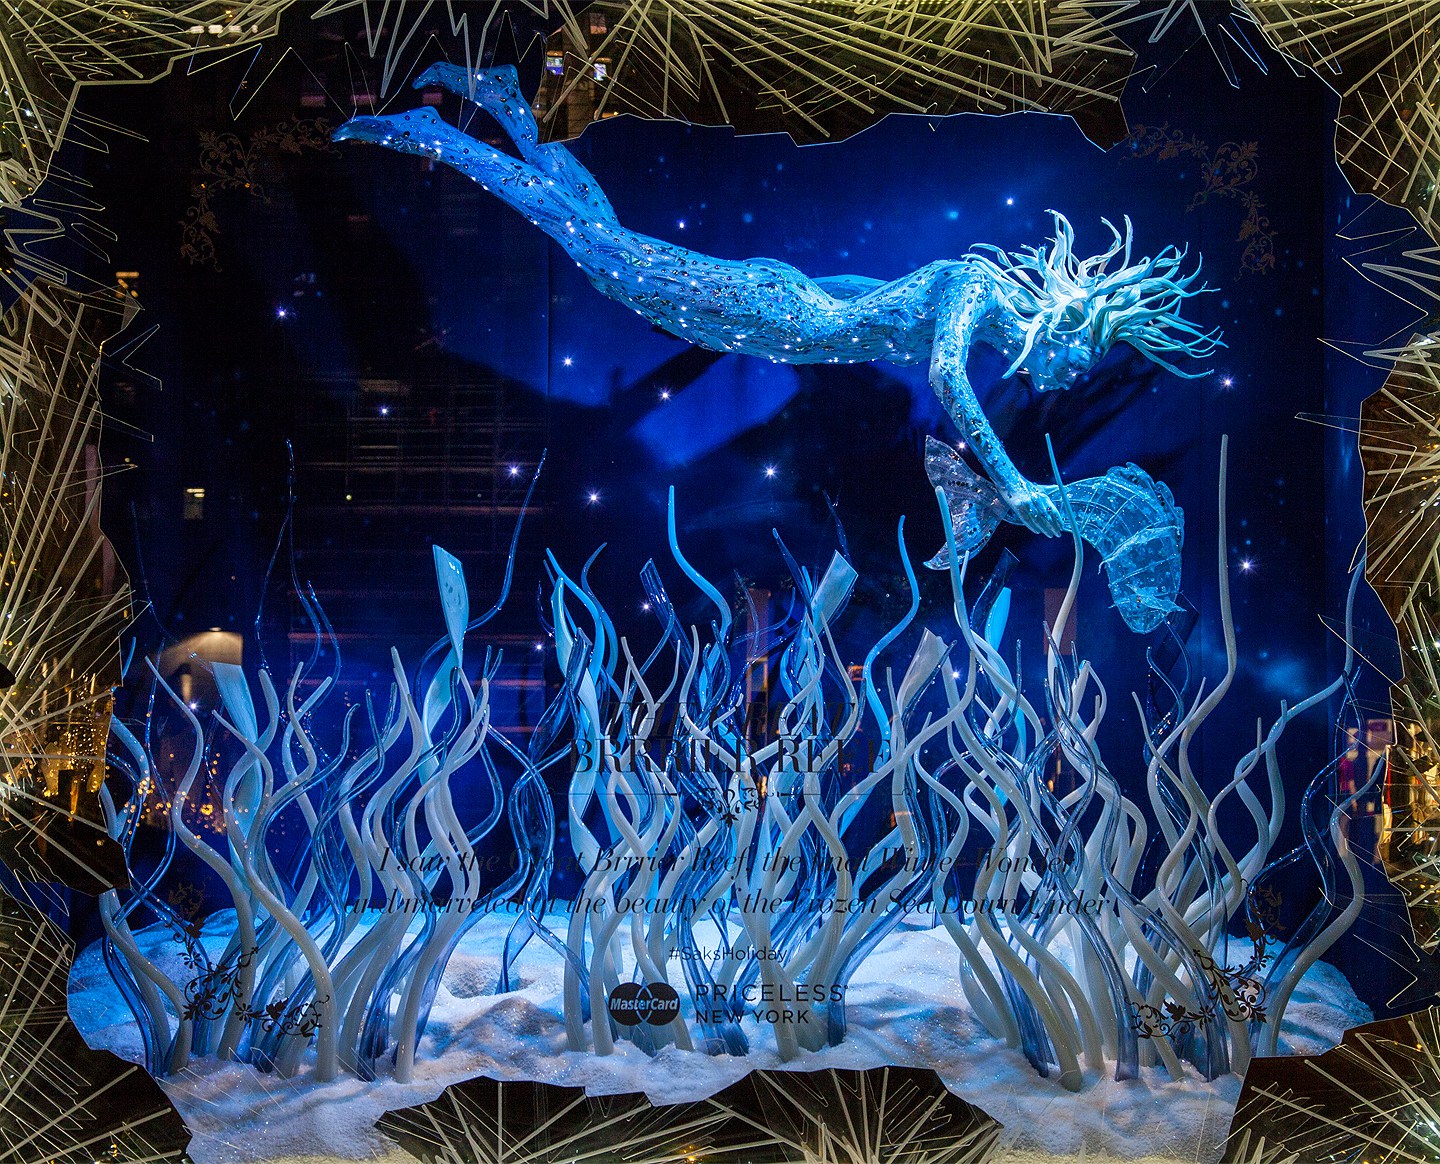 Saks Fifth Avenue Holiday Windows 2015: Great Barrier Reef